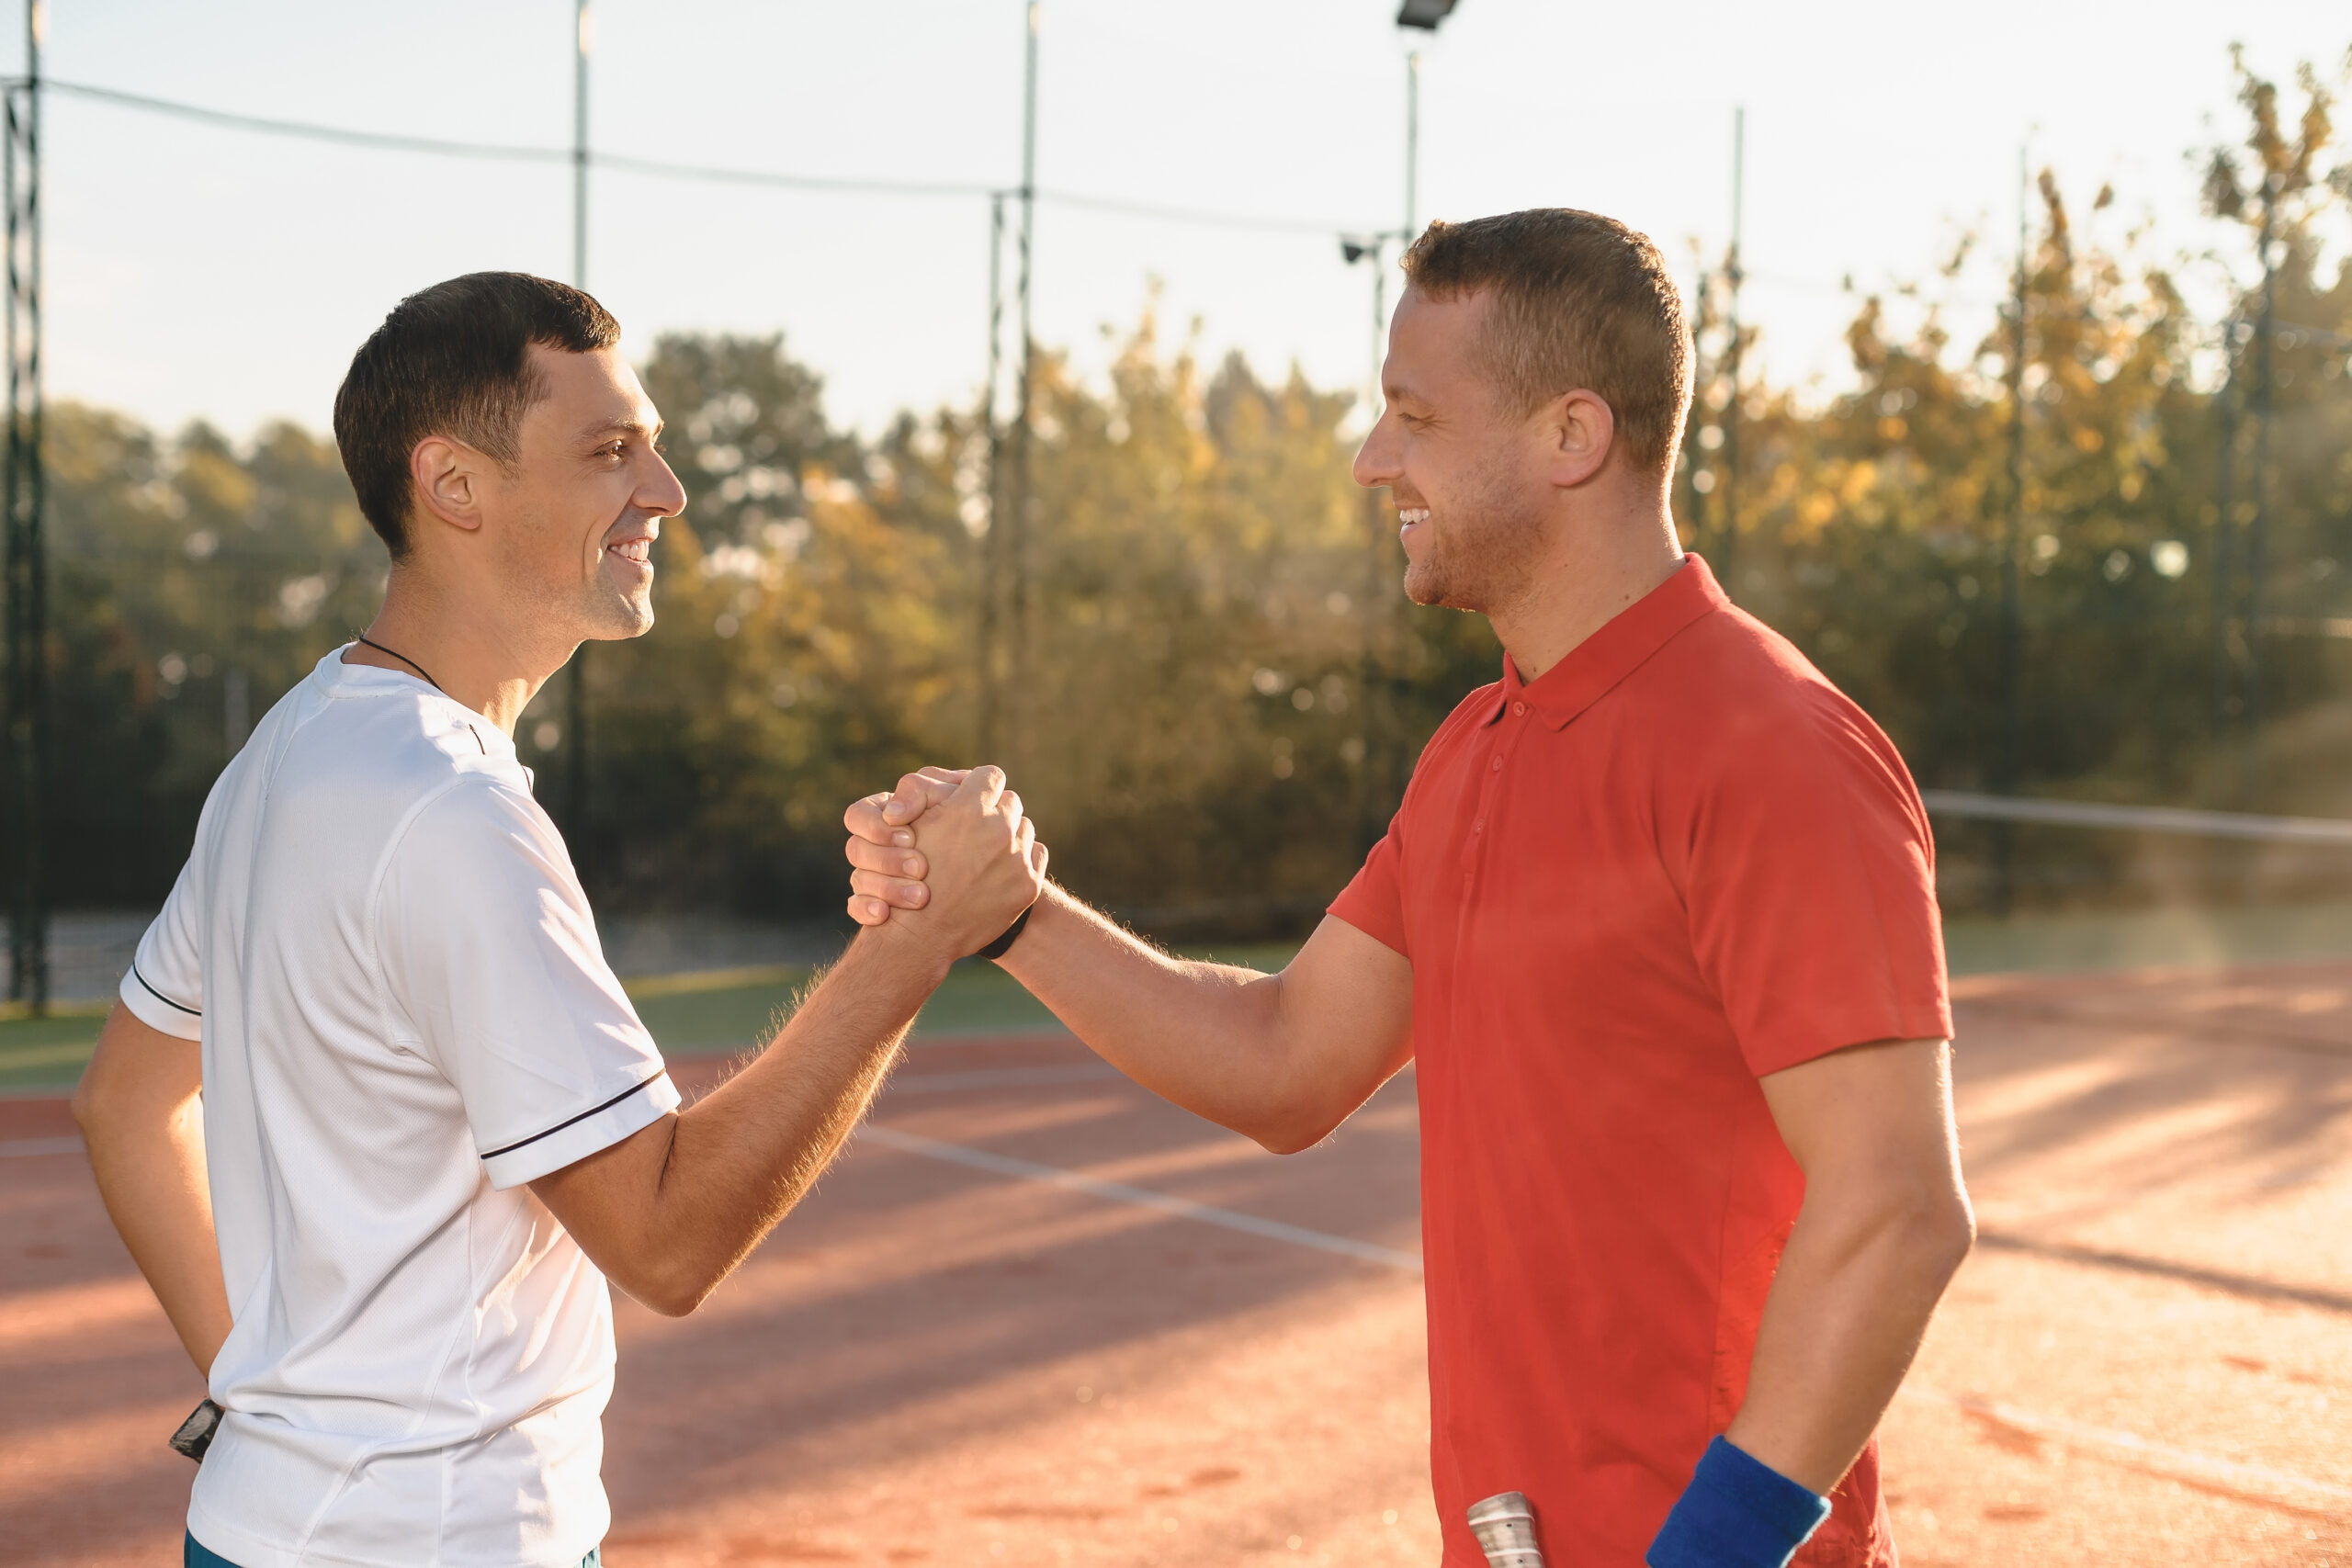 Two determined men are shaking hands smiling, standing in morning sunlight outdoors. Concept sport, health and friendship.